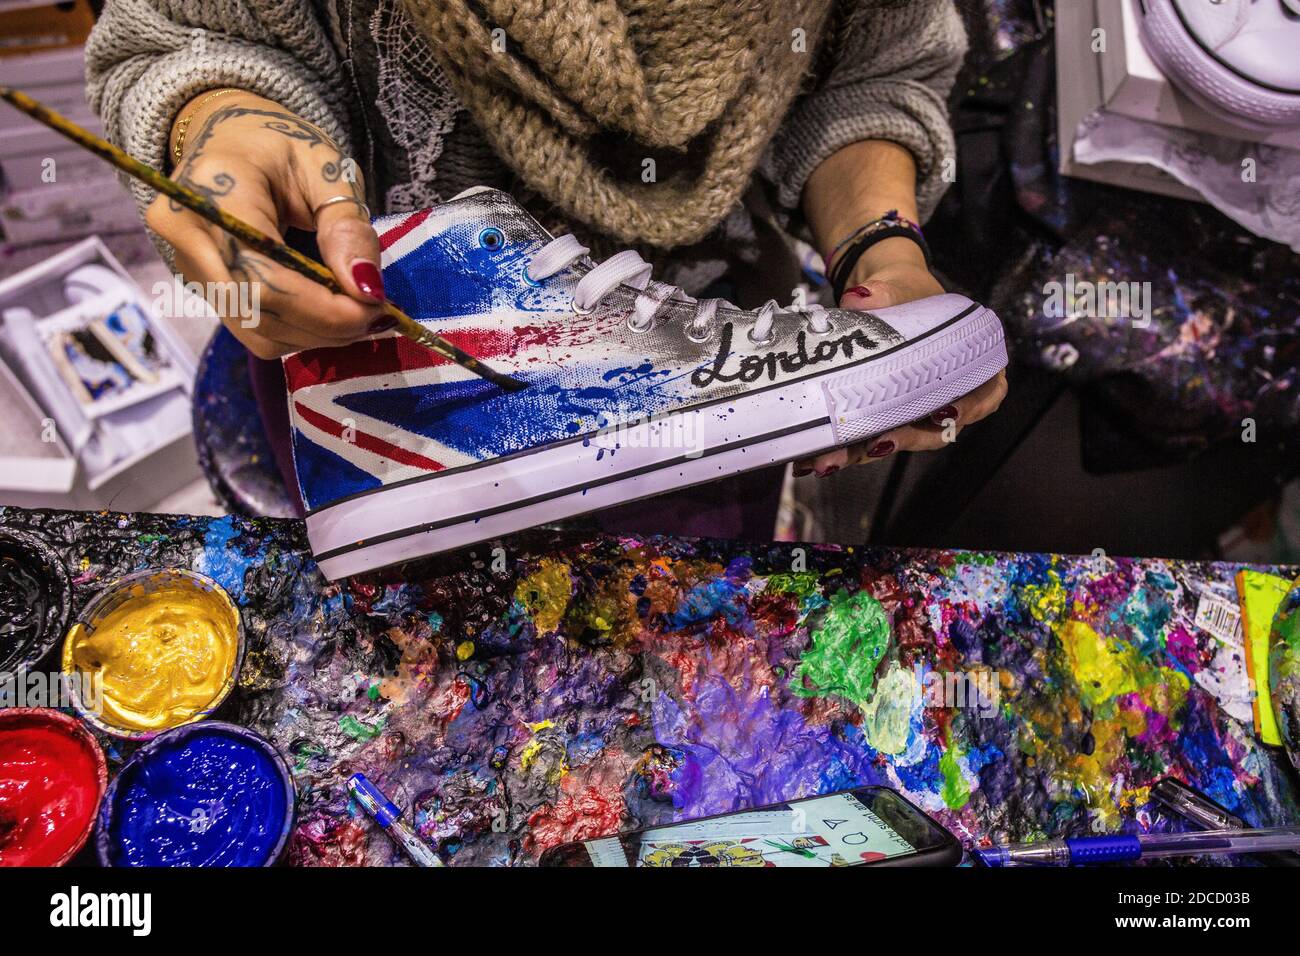 Great Britain / England /London / Hand painted converse shoes Camden Market in London. Stock Photo